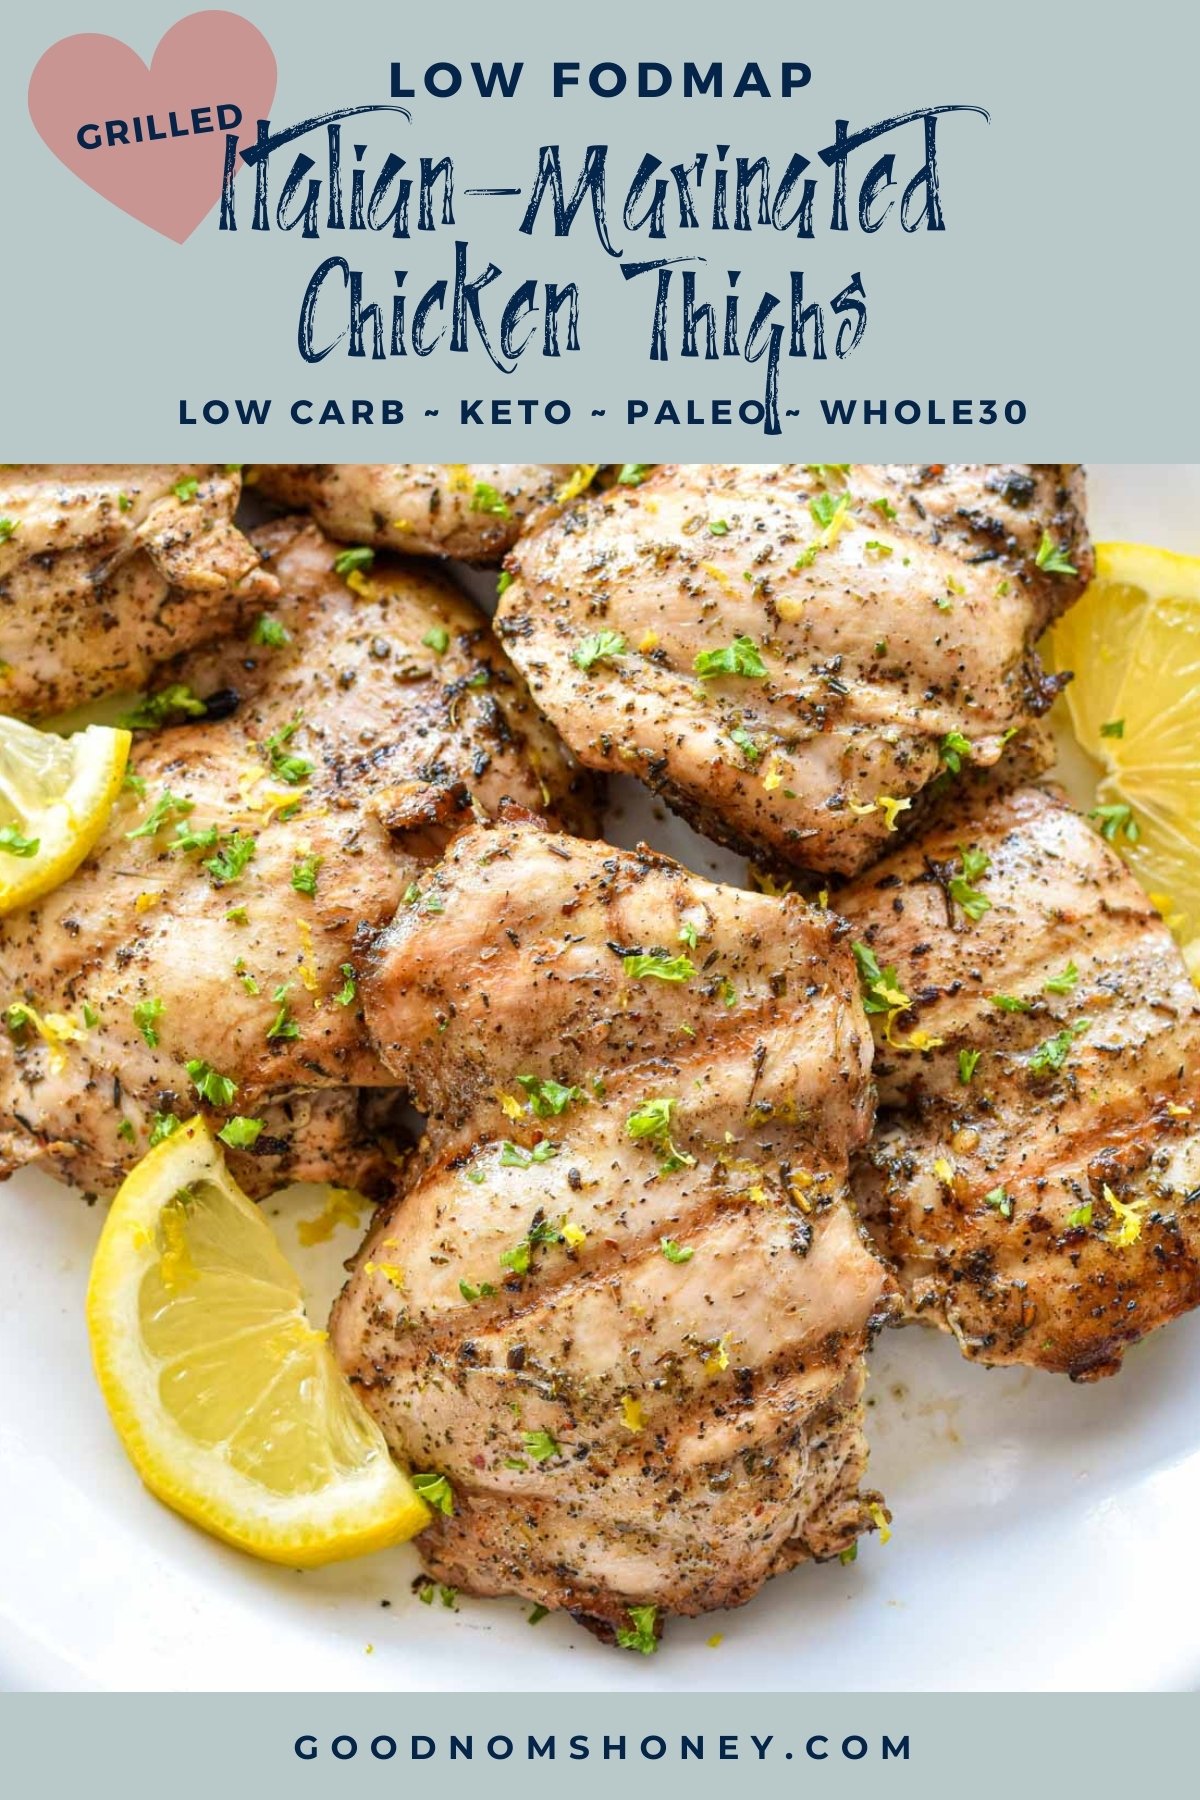 pinterest image with low fodmap Italian-marinated grilled chicken thighs low carb keto paleo whole30 at the top and goodnomshoney.com at the bottom